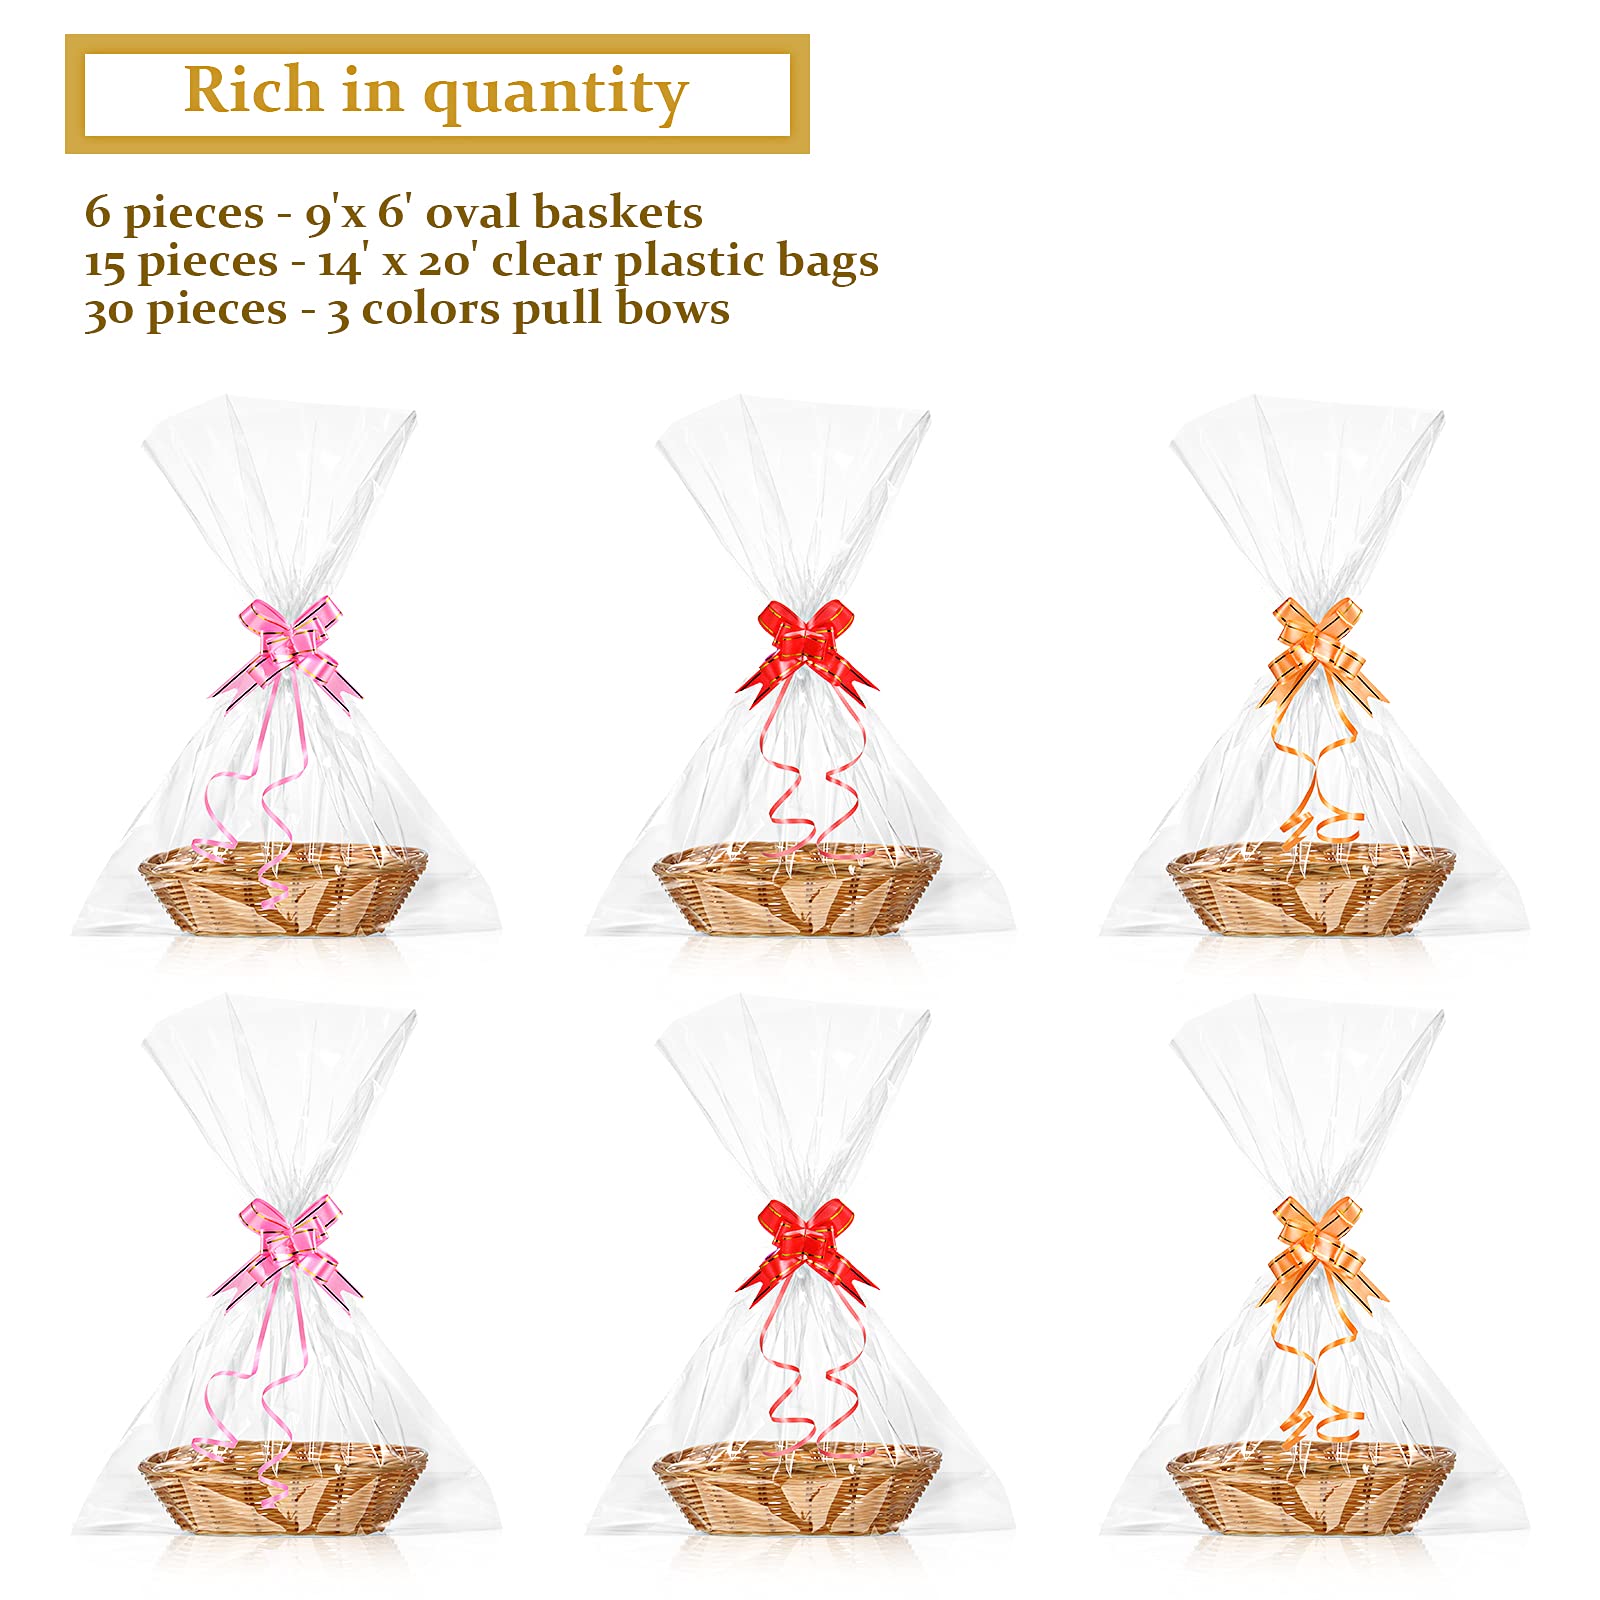 Oval Basket Food Storage Basket Woven Empty Basket Fruit Basket 9 x 6 x 2.25 Inches Present Baskets with Colorful Pull Bows and Clear Bags for Kitchen, Restaurant, Wrapping Presents (6 Pack)